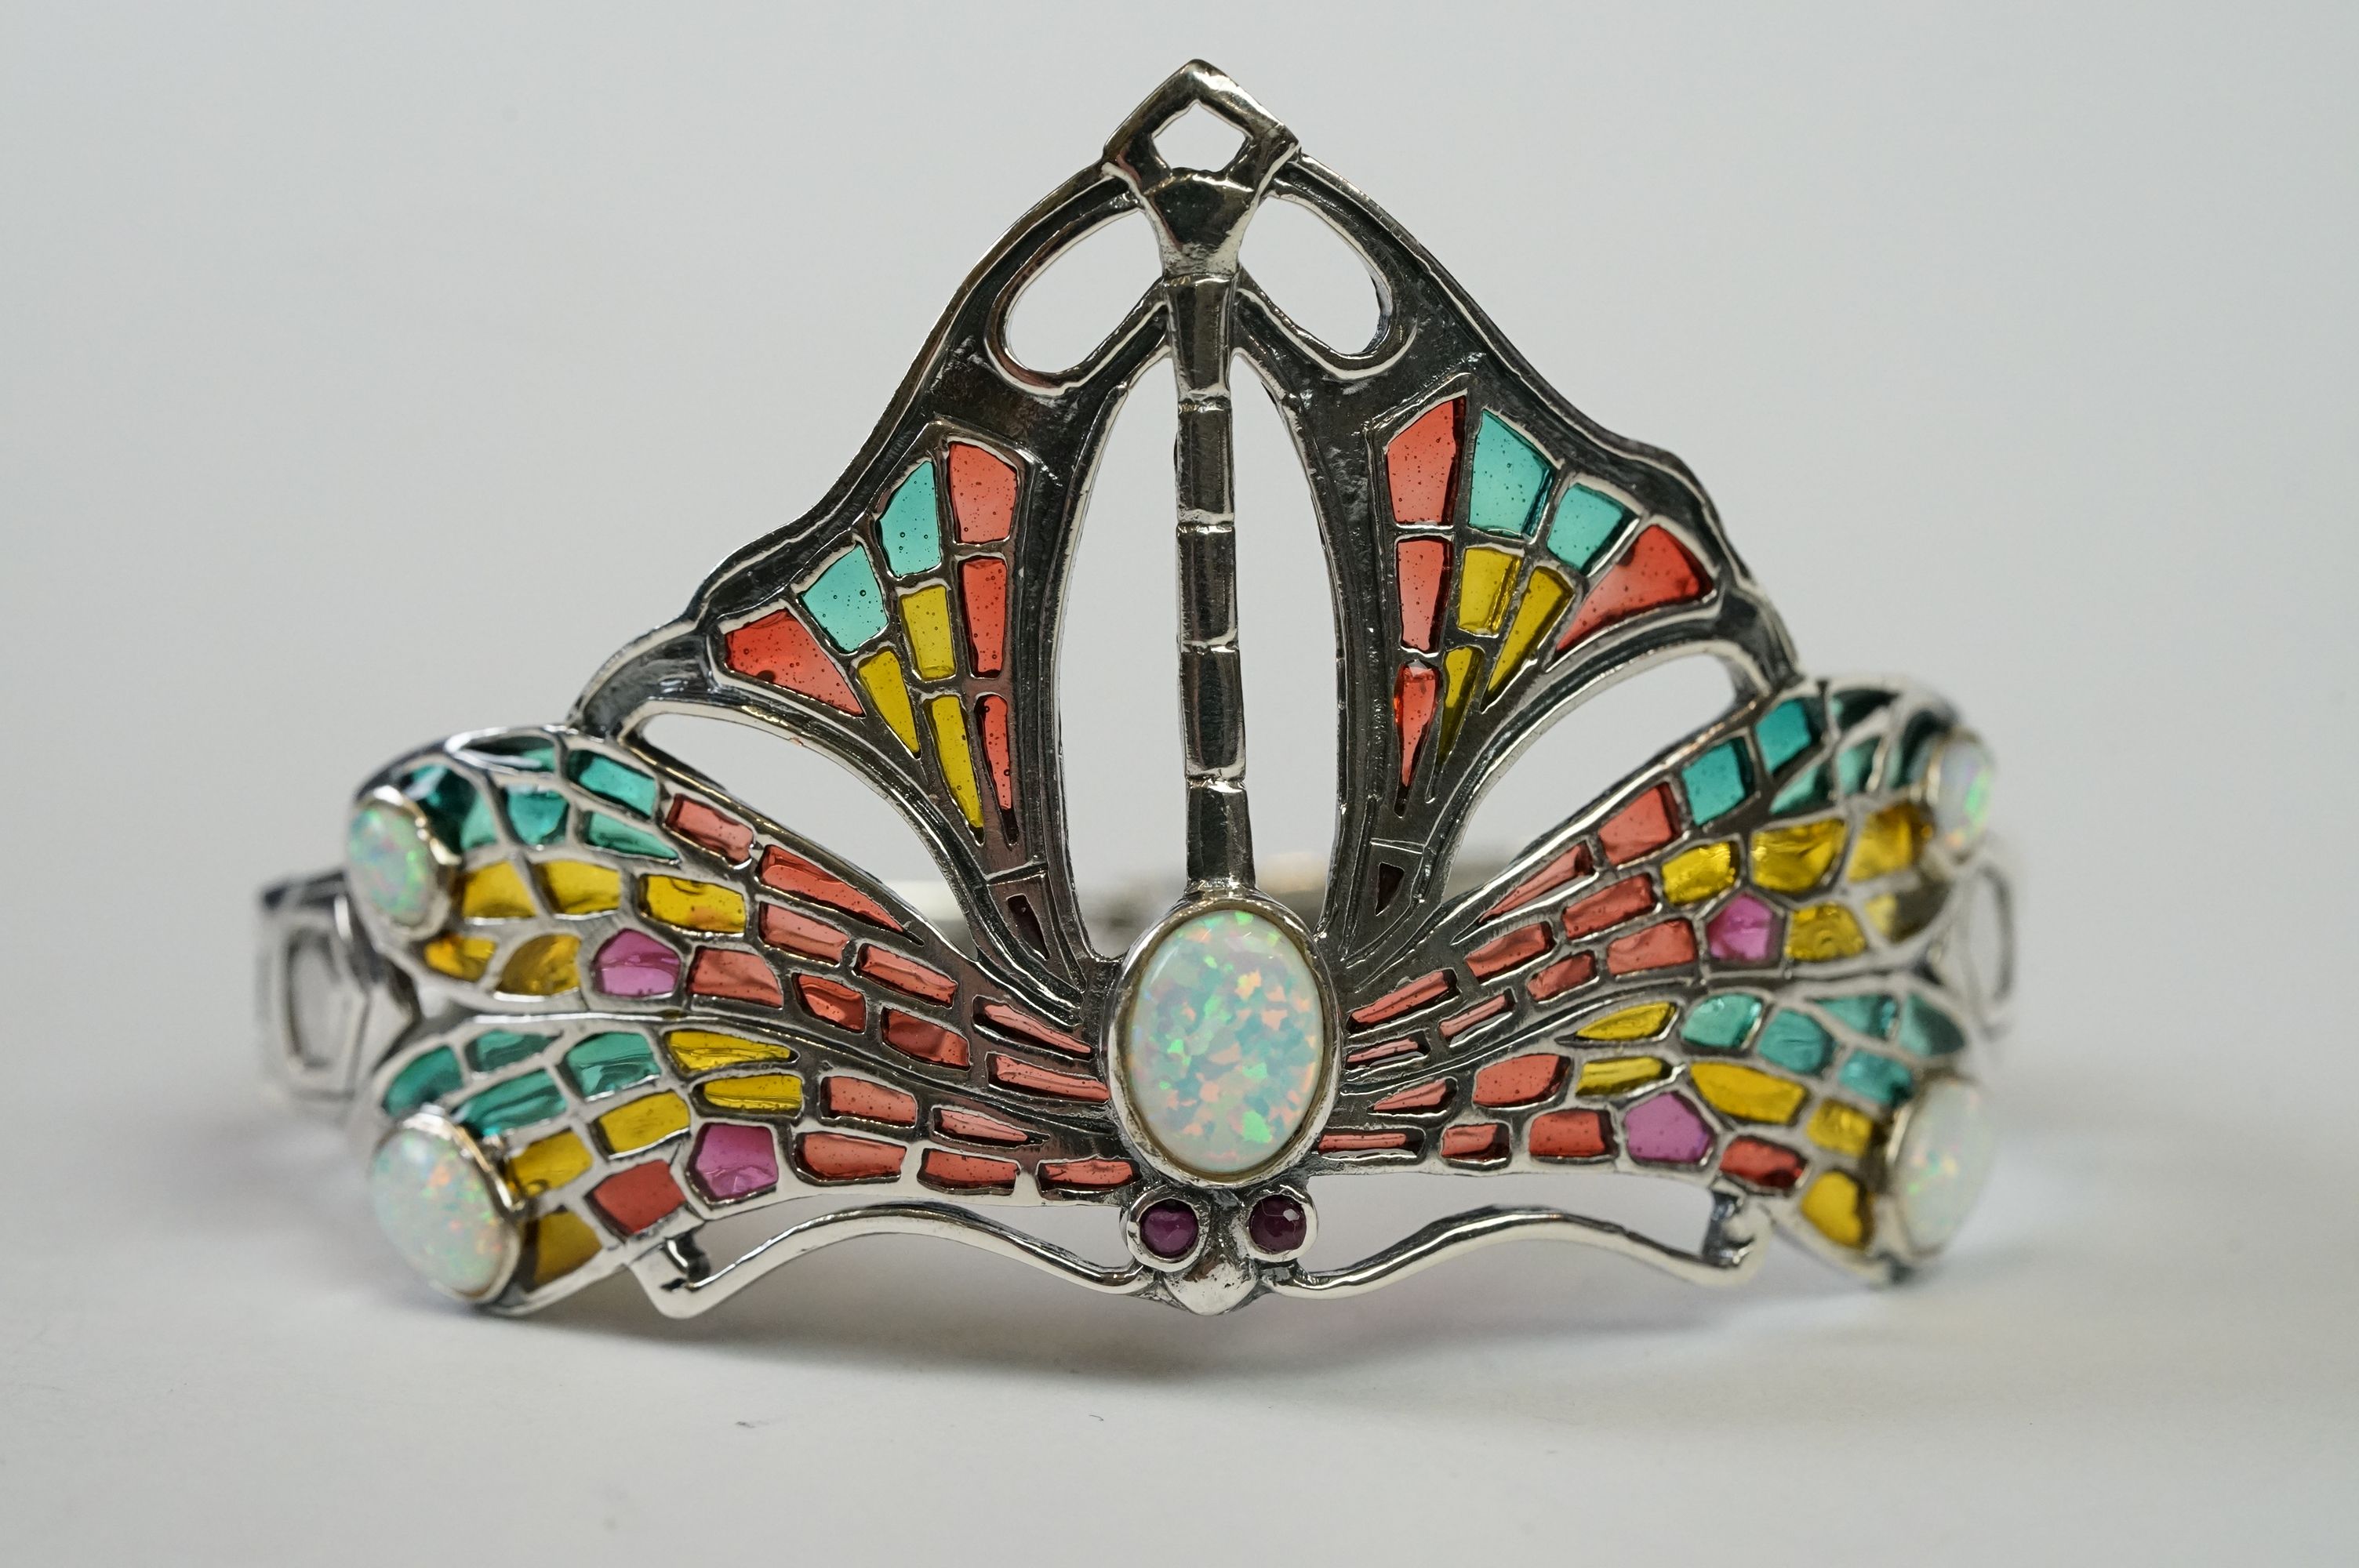 Large Silver Plique a Jour Cuff Bangle in the Art Deco style with opal cabochons - Image 2 of 11